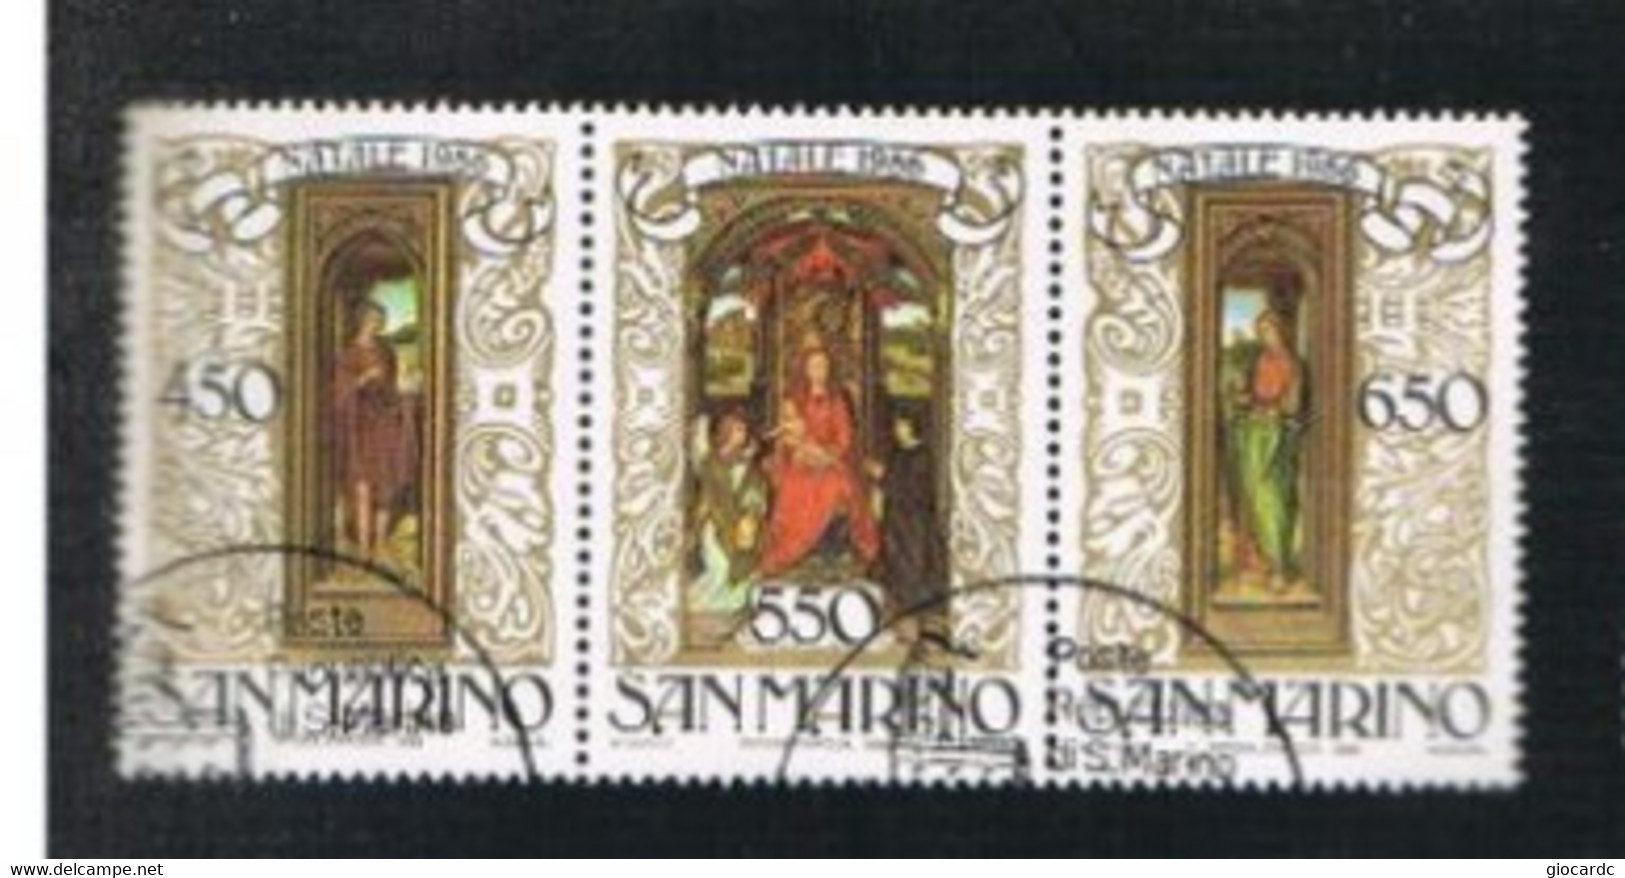 SAN MARINO - UNIF. 1192.1194 - 1986 NATALE (COMPLET SET OF 3 SE-TENANT)  - USED° - Used Stamps